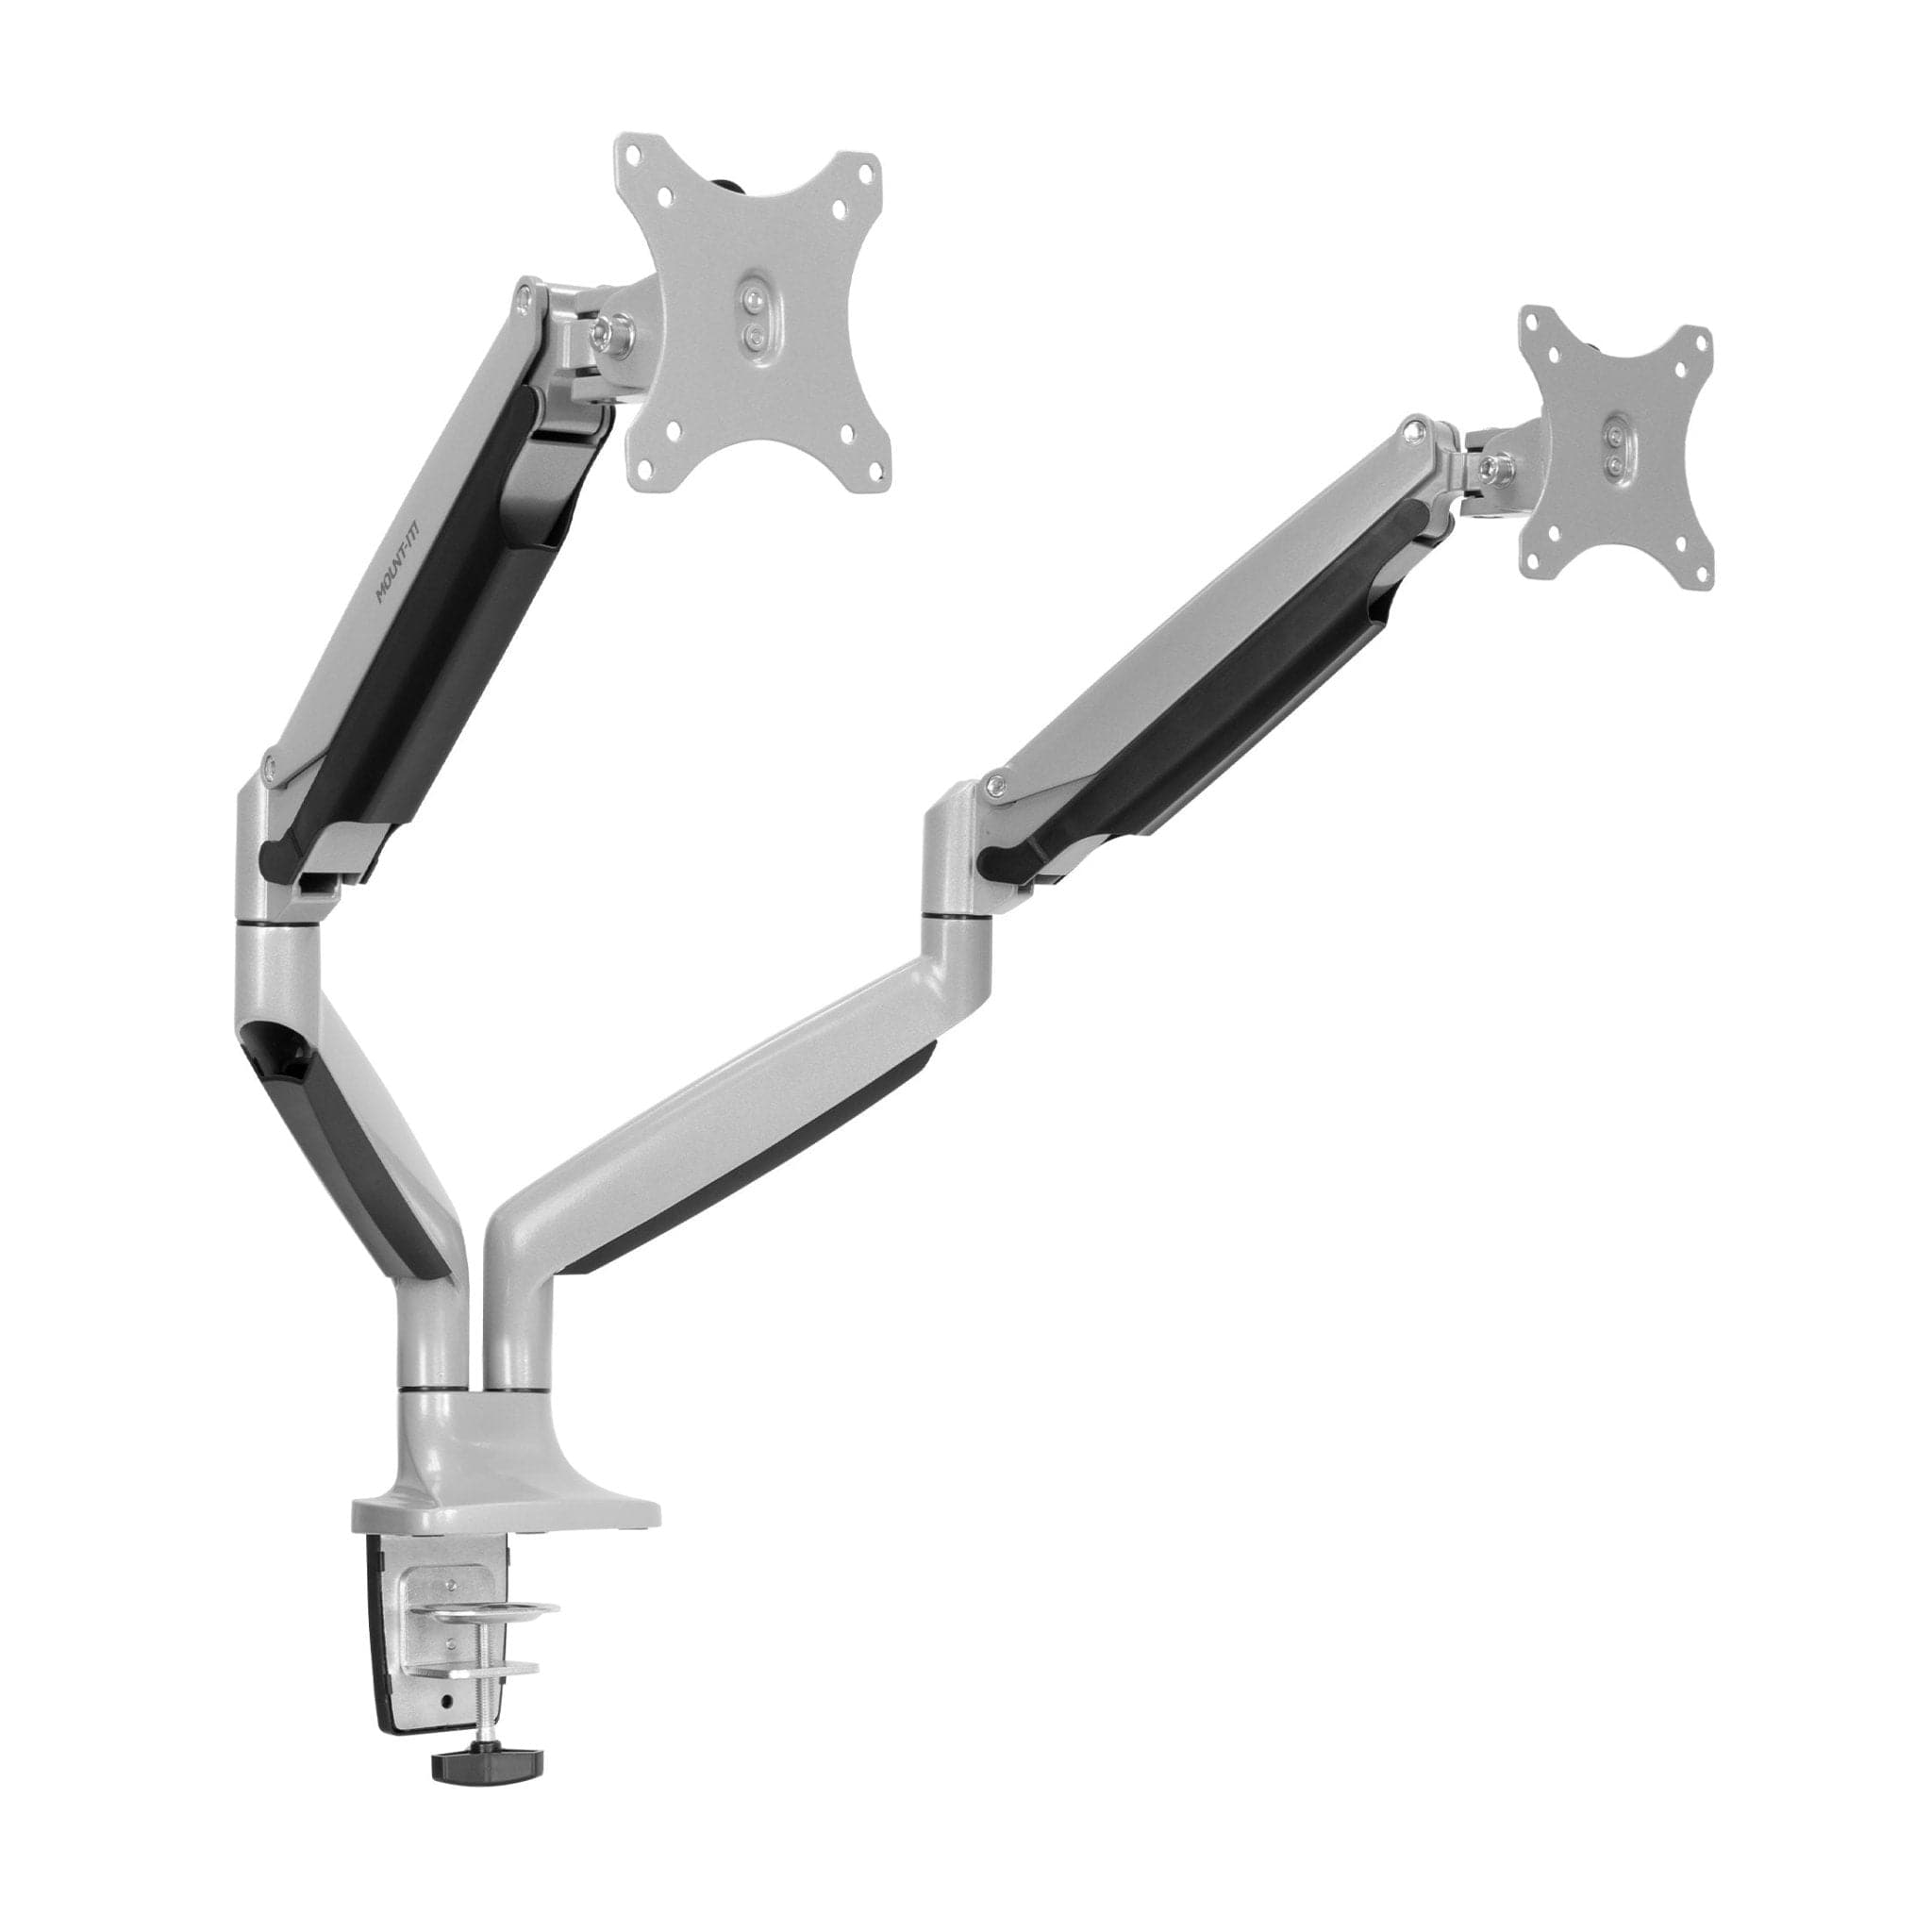 Dual Monitor Mount With Gas Spring Arms - Mount-It!